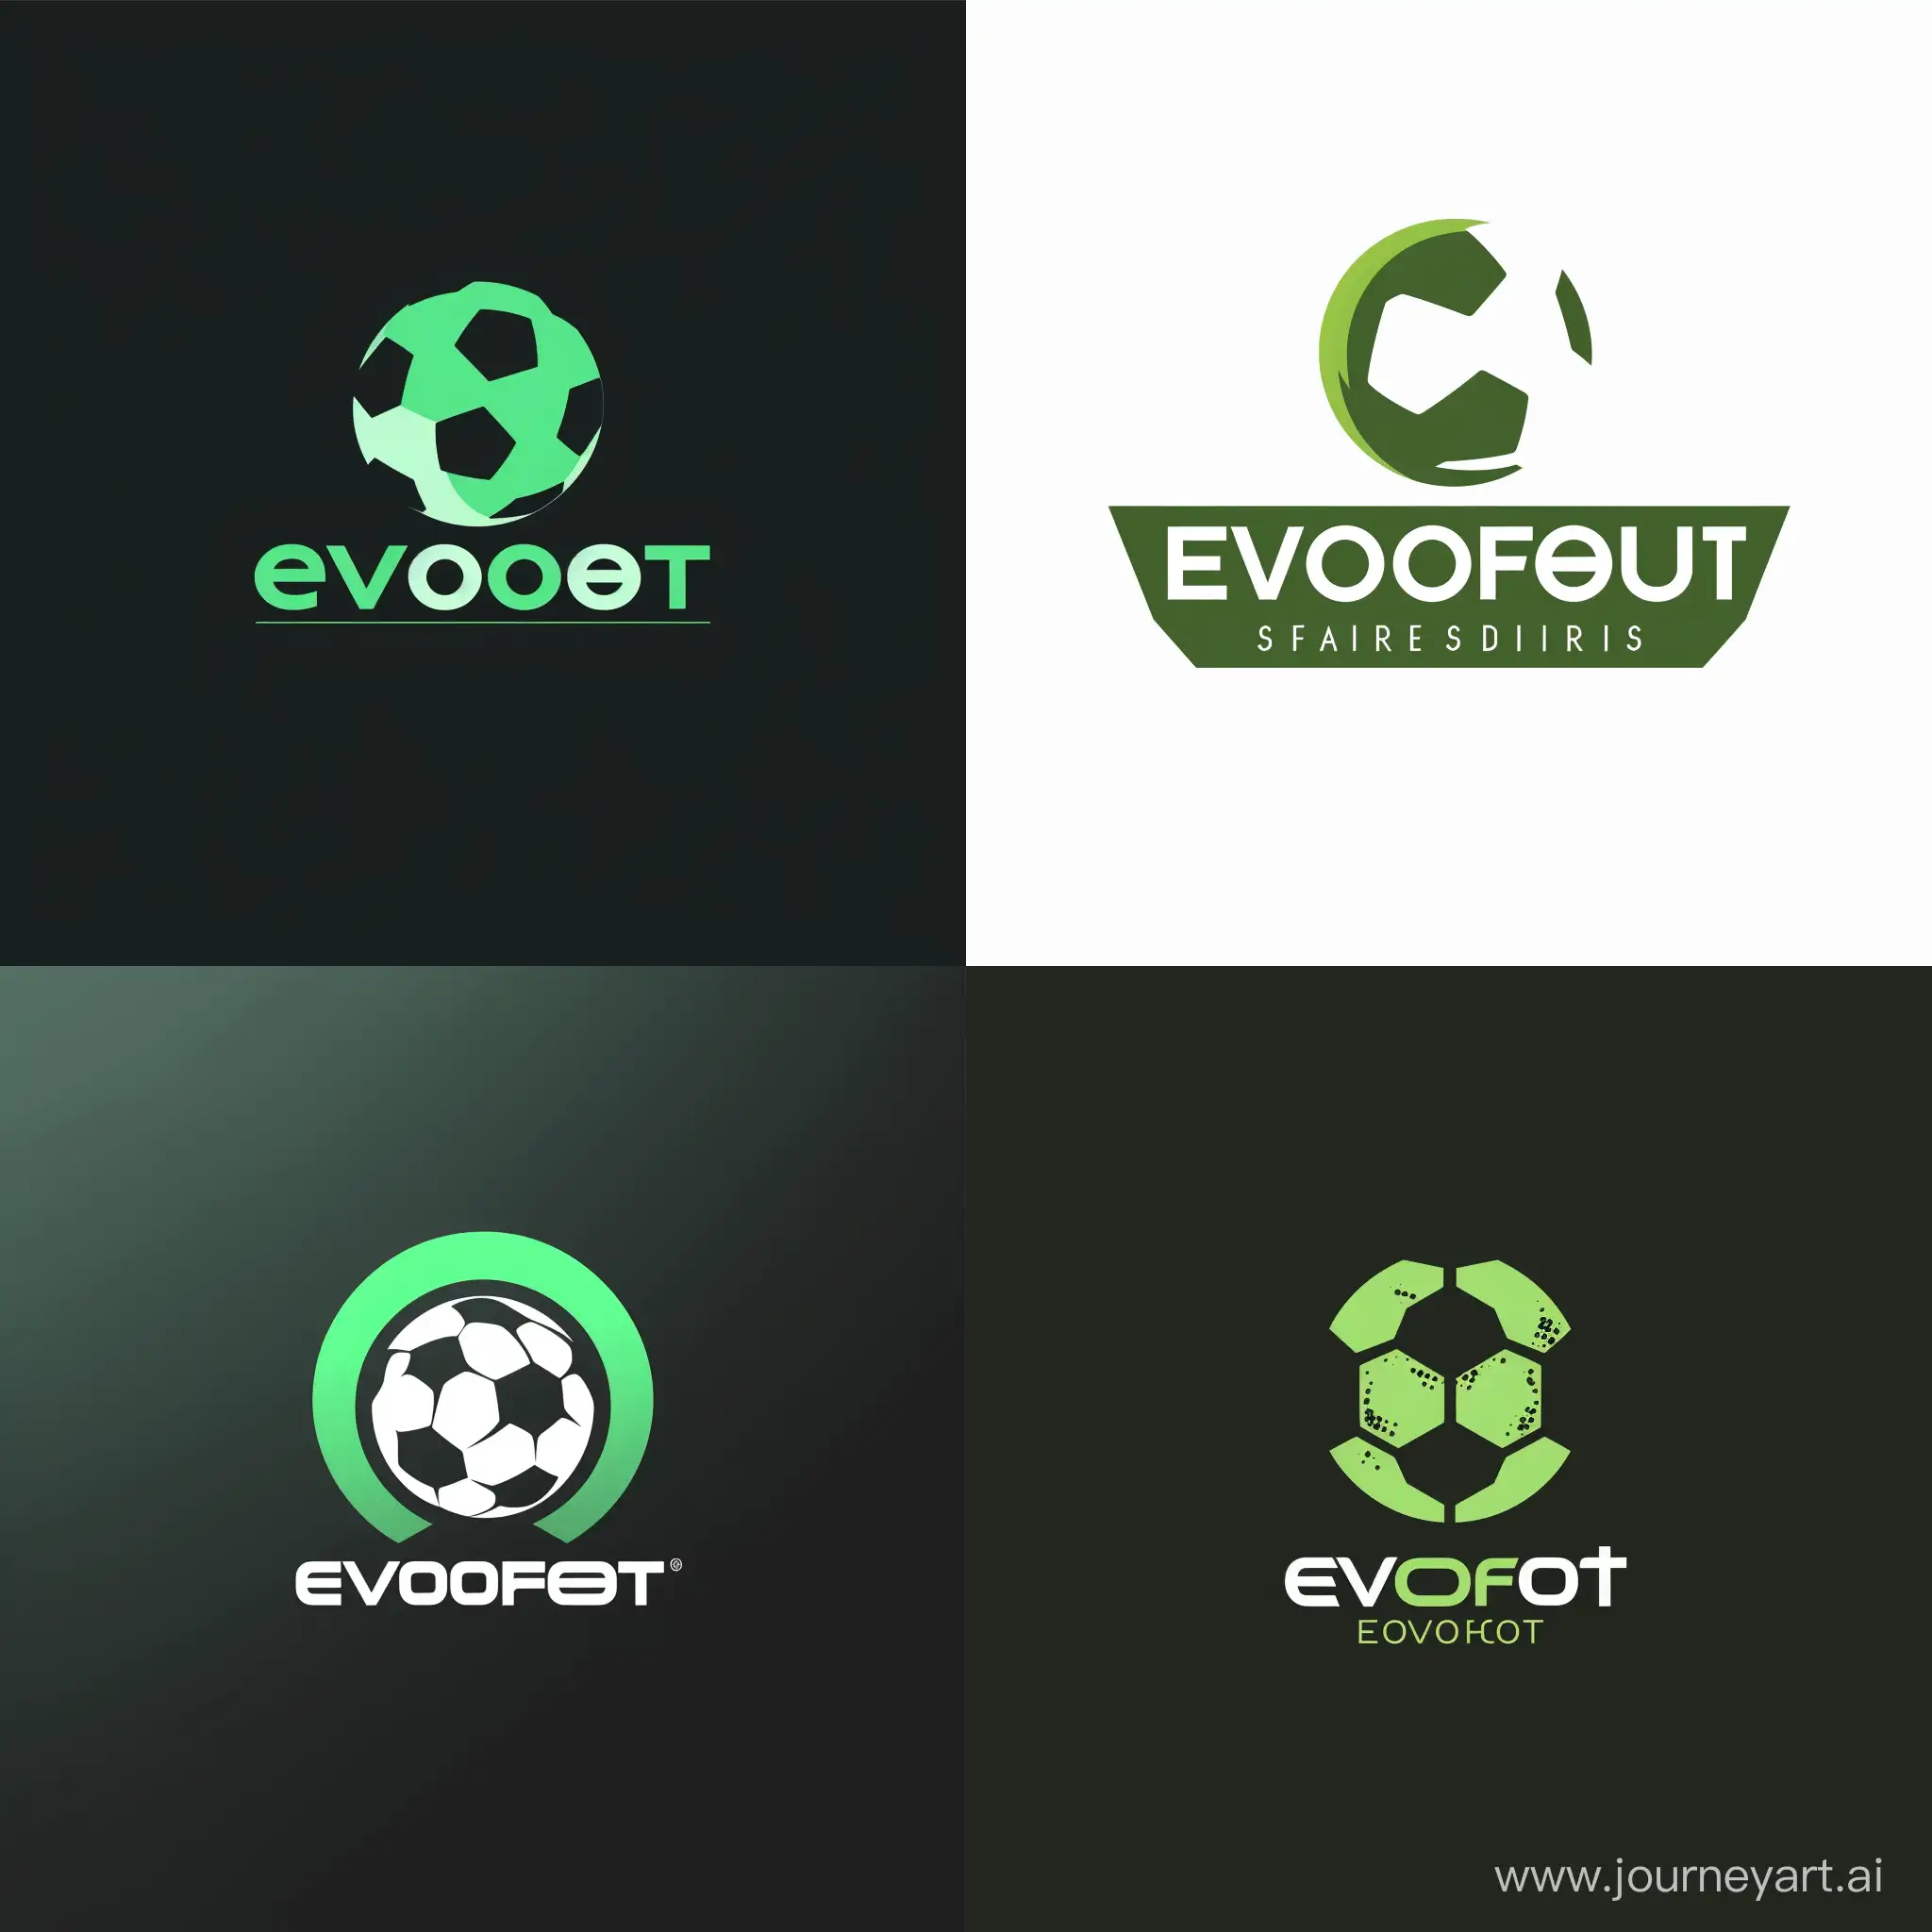 Create a minimalist logo for the football simulation game 'Evofoot'. The logo should embody the essence of football through a simple yet powerful design. Focus on clean lines and geometric shapes. Use a single soccer ball icon that is stylized to imply motion and evolution, perhaps through a subtle gradient or a clever use of negative space. The text 'Evofoot' should be in a sleek, sans-serif font, emphasizing clarity and modernity. Keep the color scheme monochromatic, using shades of green to connect with the football pitch, complemented by either white or black for contrast. The overall look should be uncluttered and sophisticated, easily recognizable and scalable for various branding needs. It should also convey a forward-thinking and elegant game experience with its simplicity and refined execution.